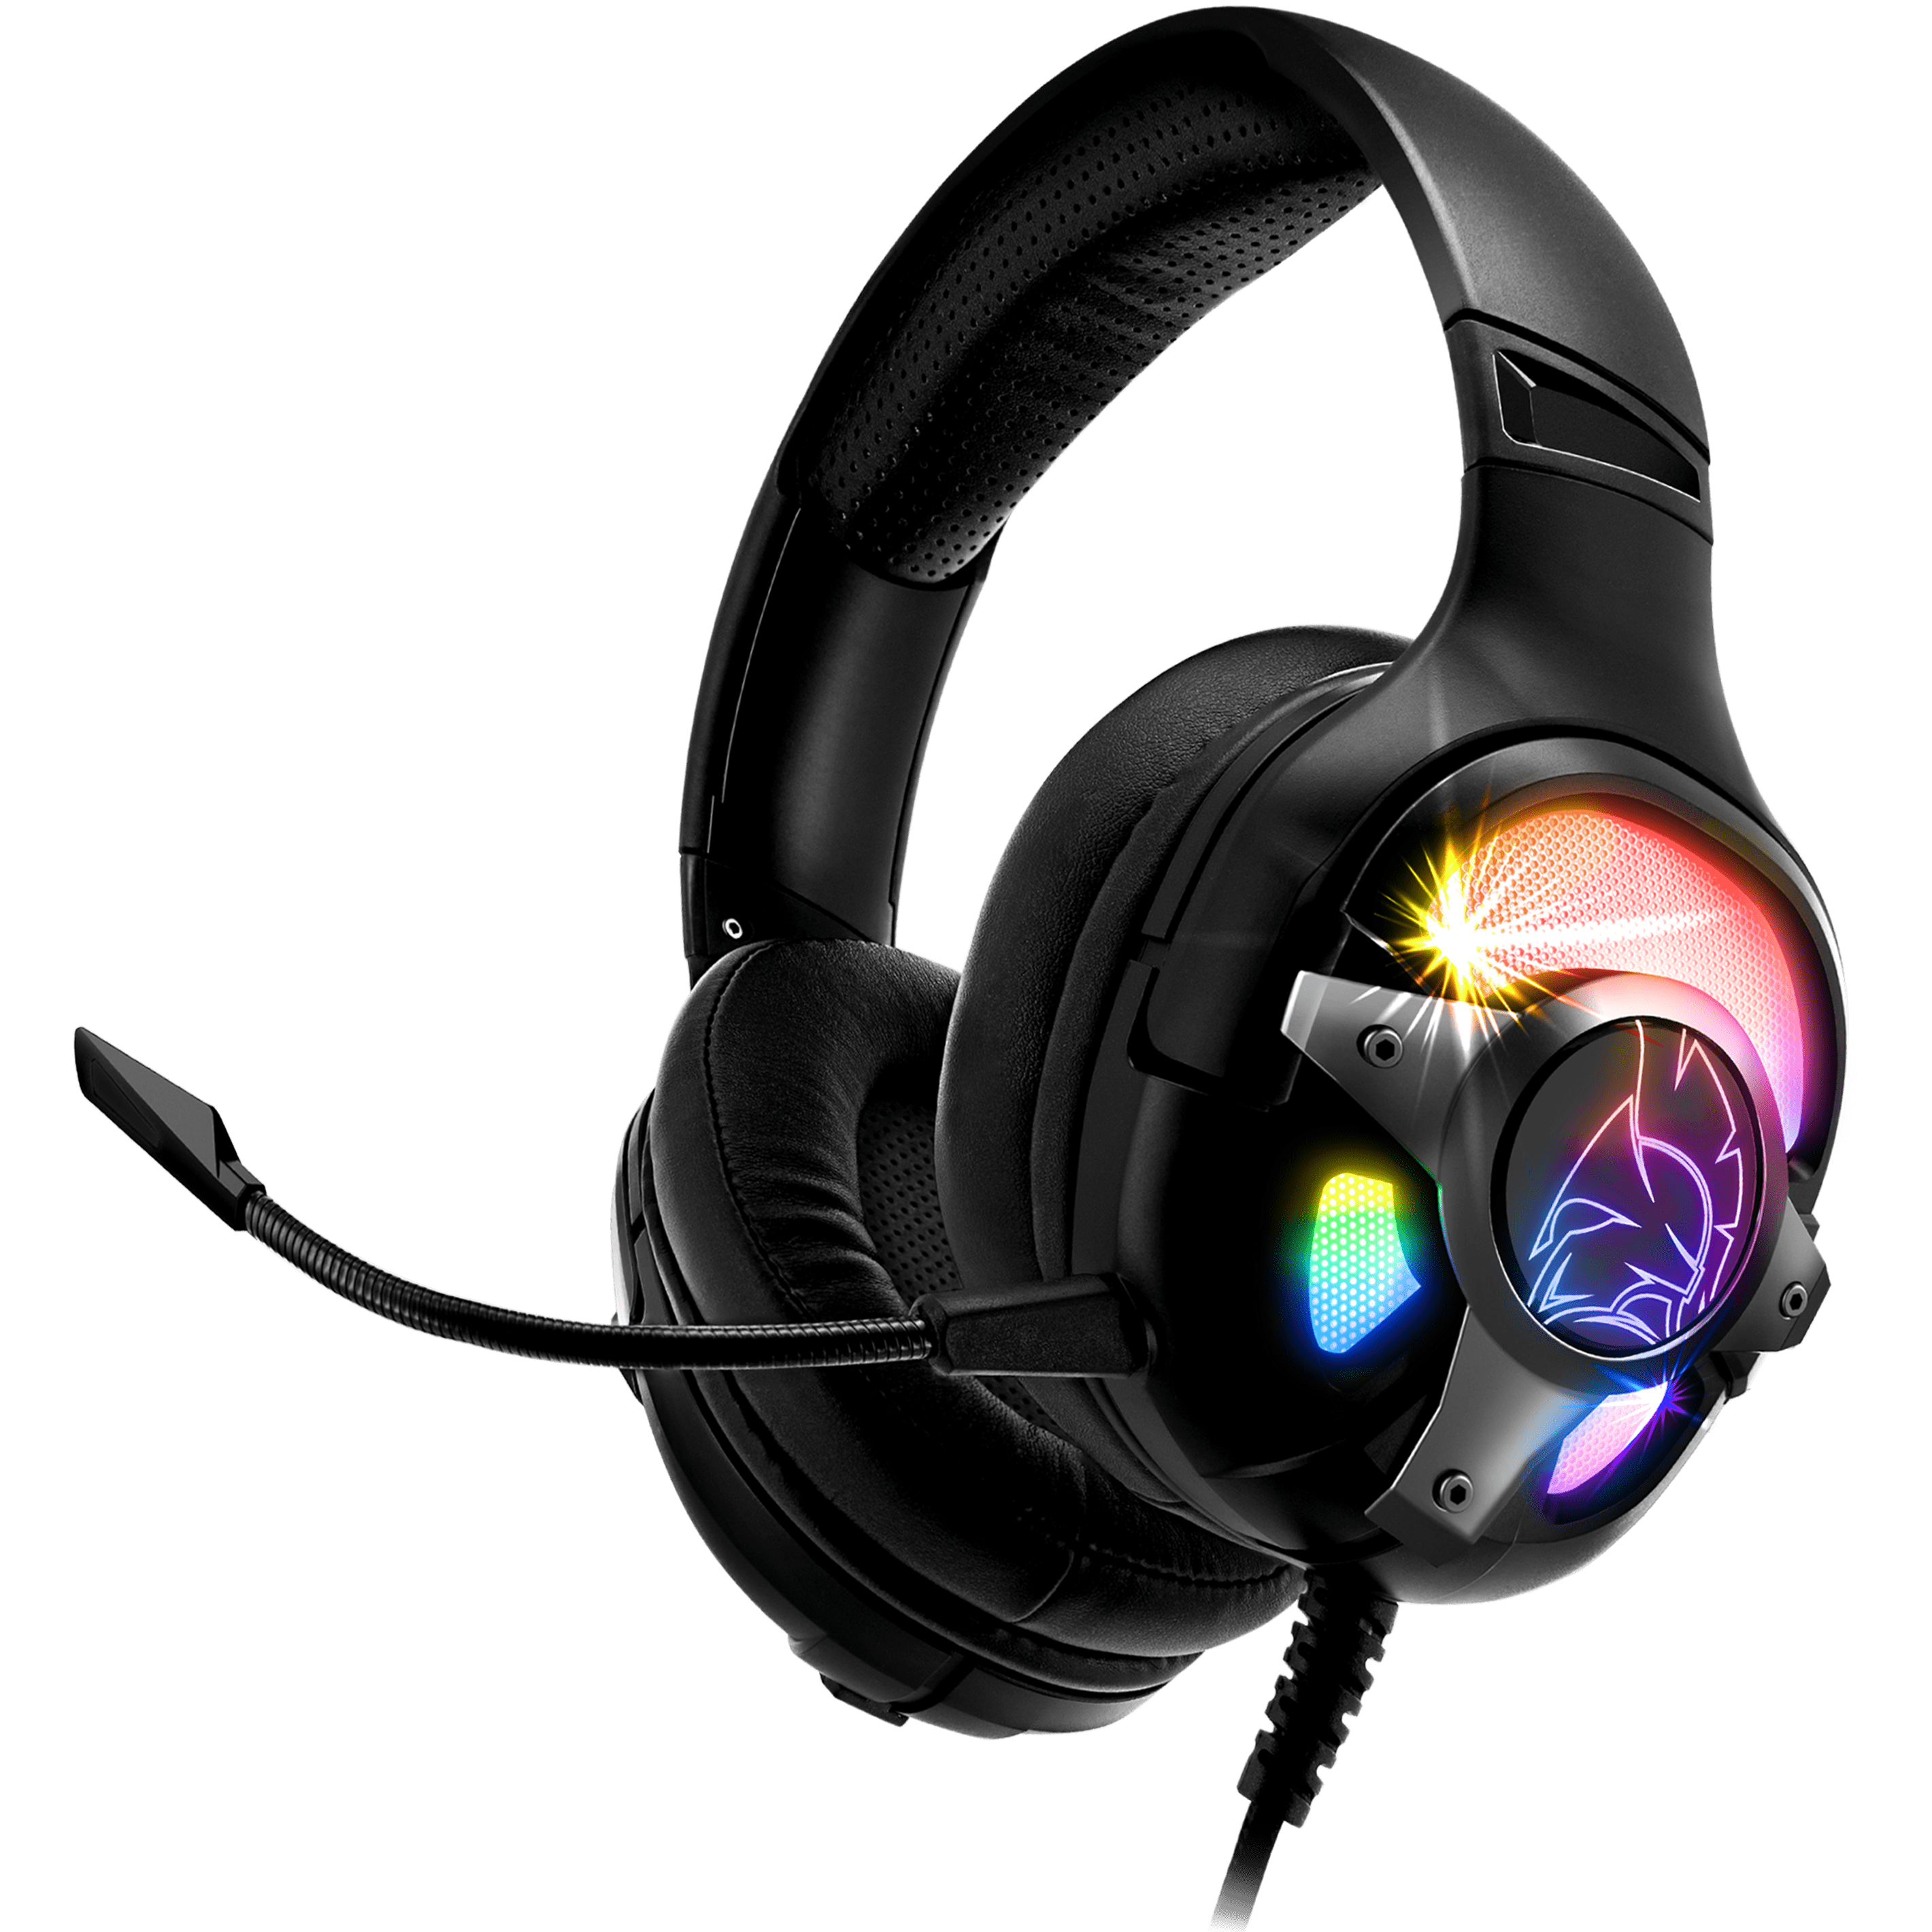 EMPIRE GAMING - WarCry P-W2 Casque Gamer RGB sans Fil WiFi avec